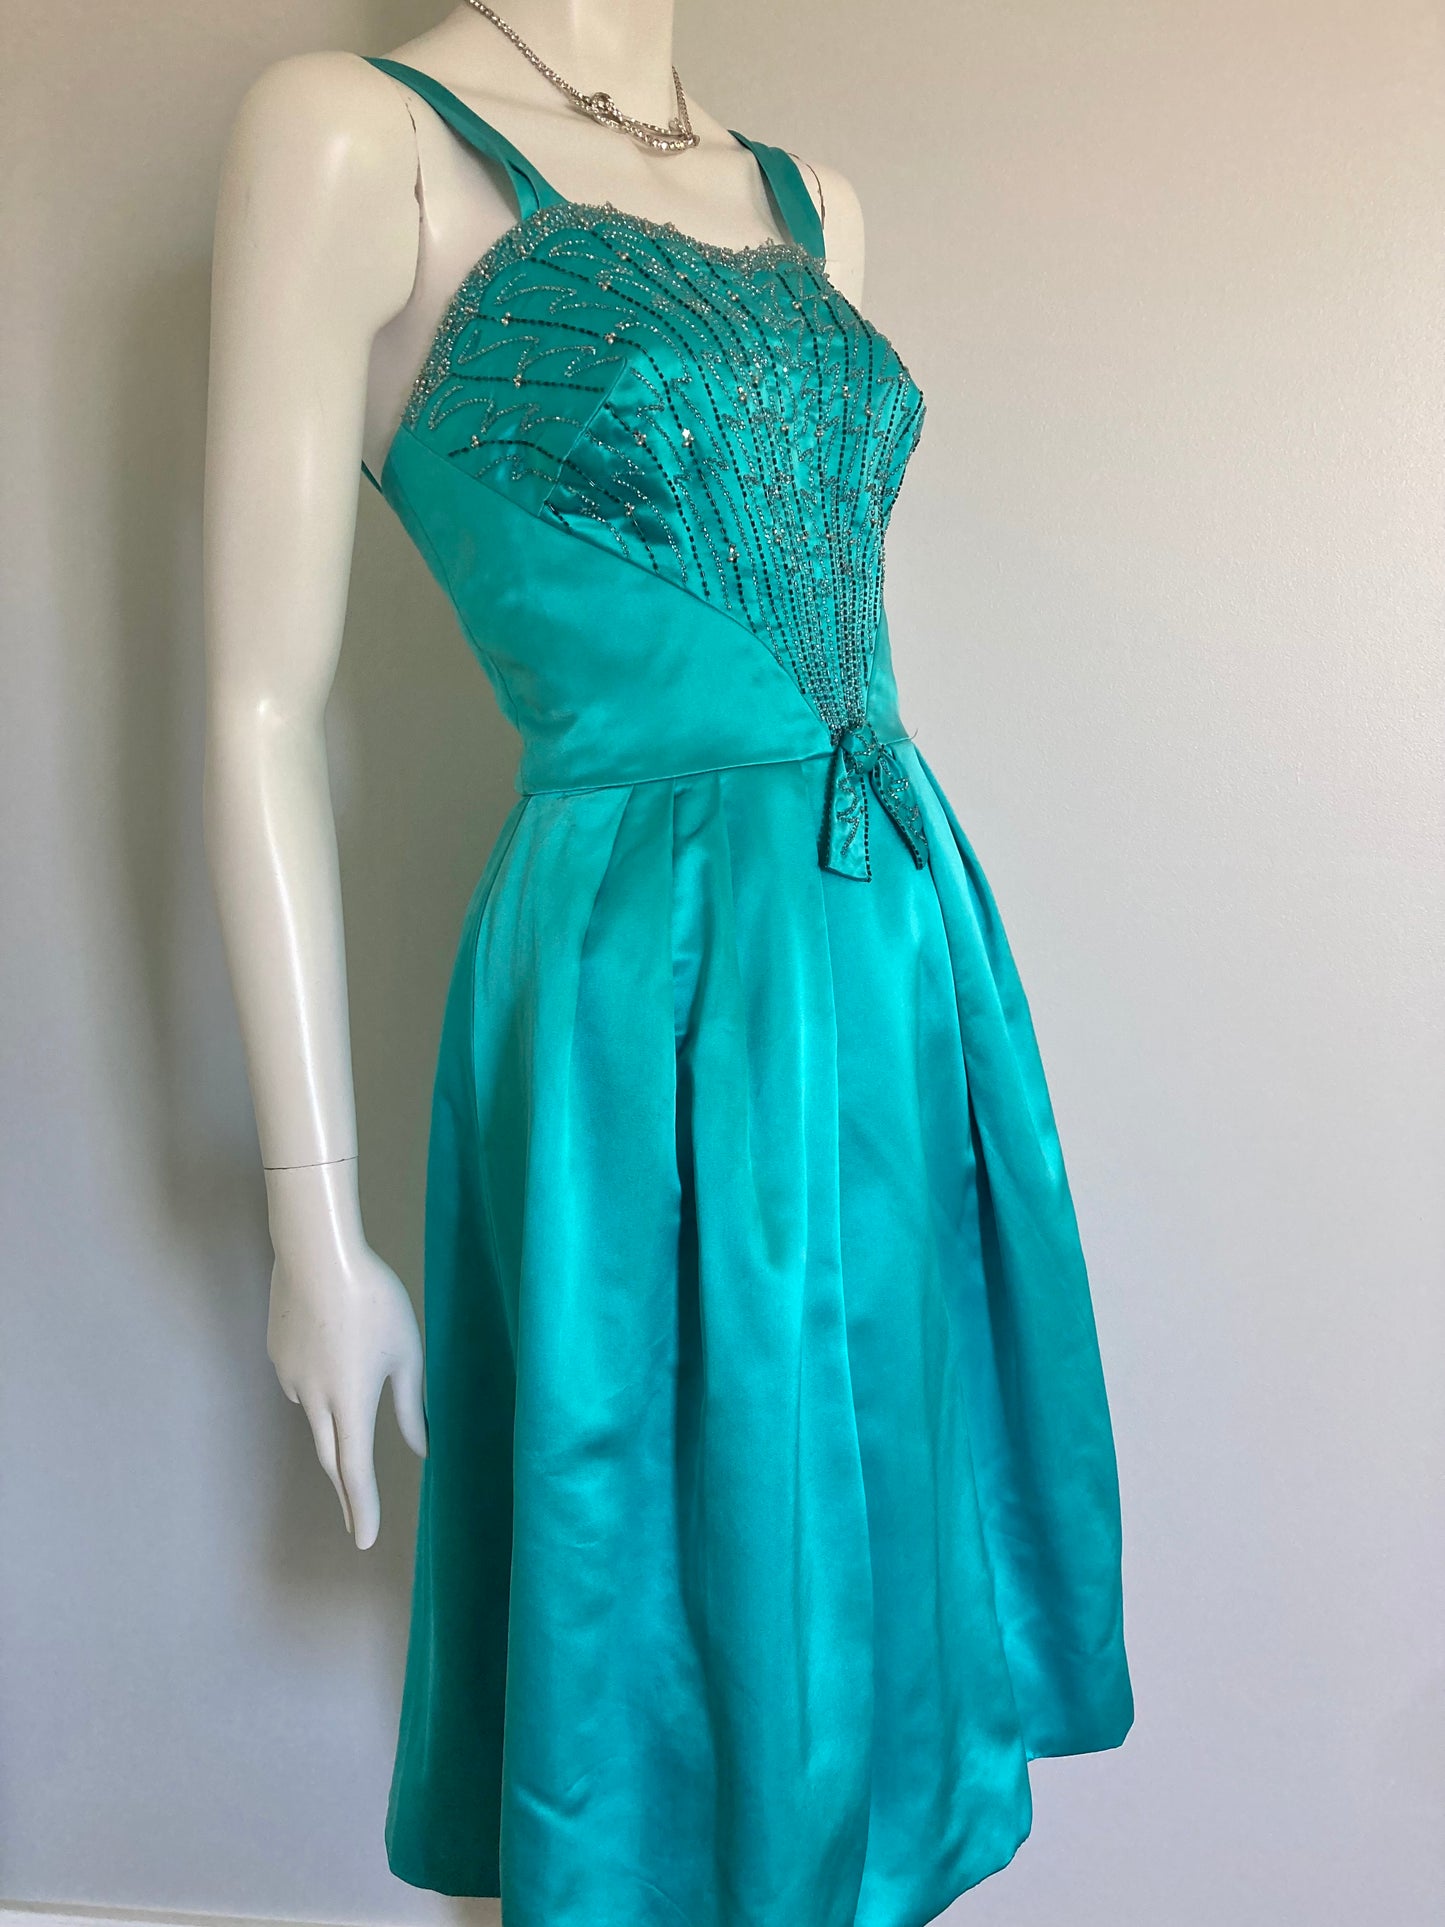 Stunning 50s Heavy Satin Party Dress with Beaded Detail, Size S